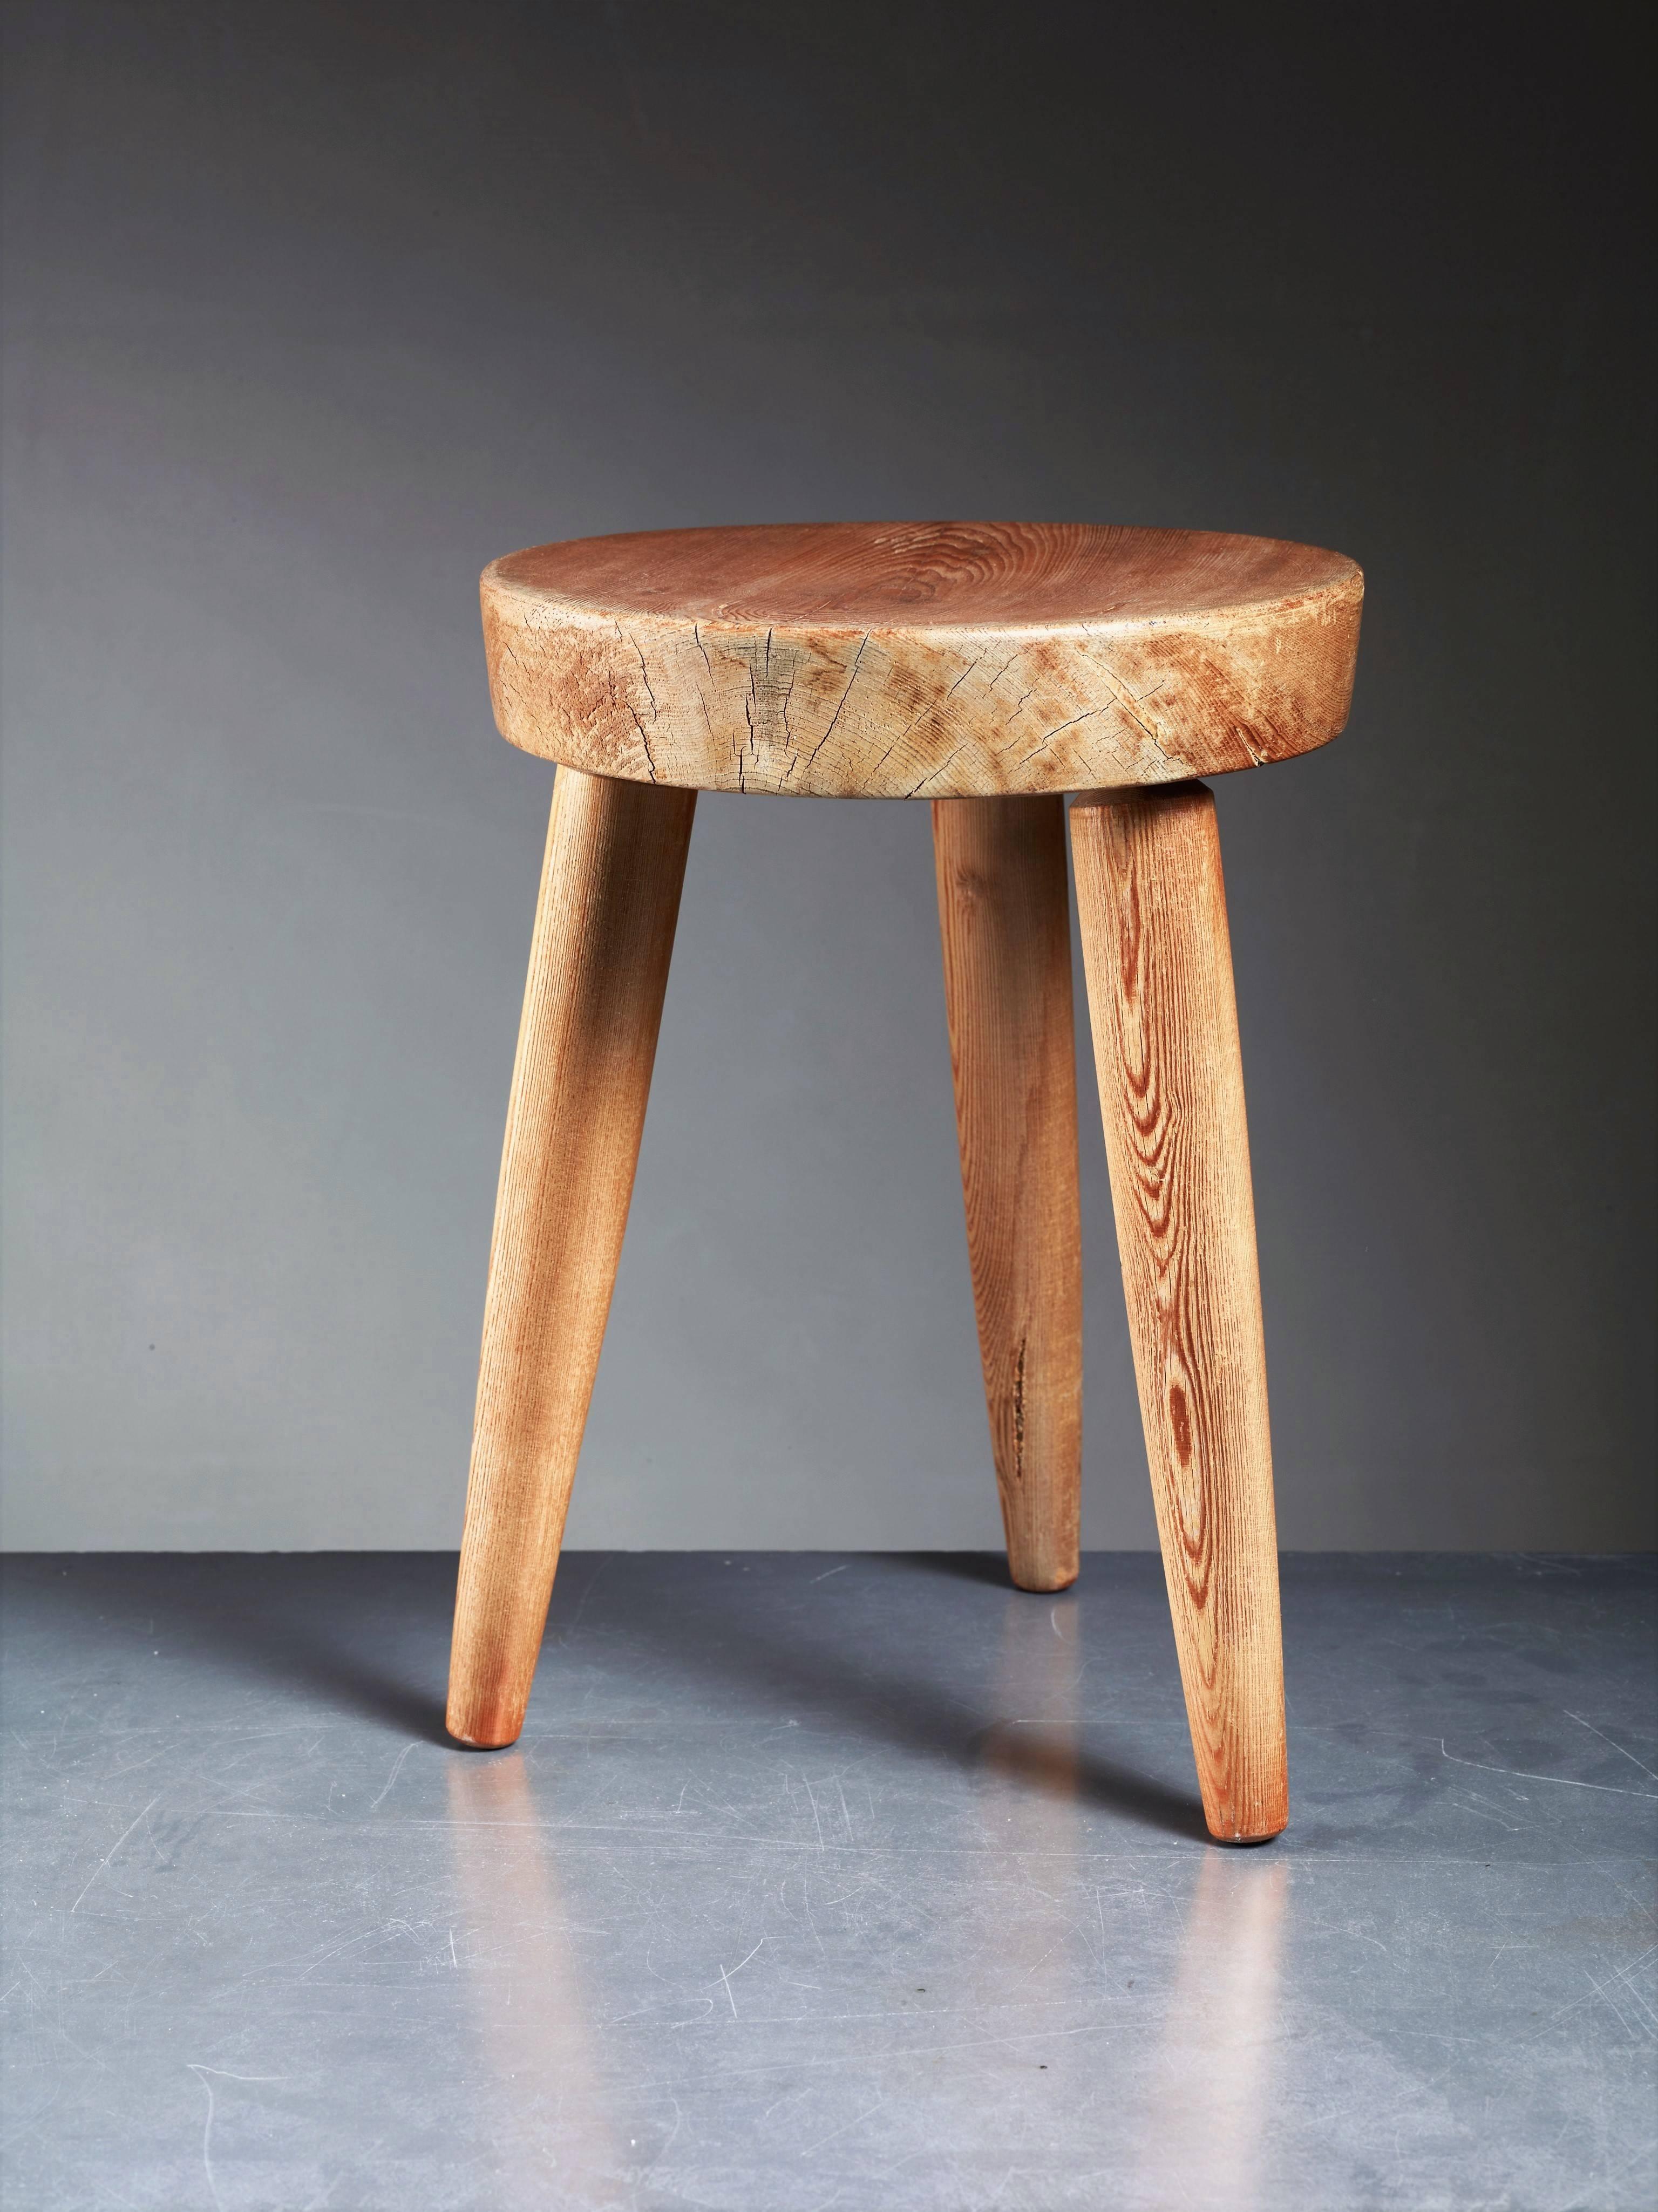 A rare pine tripod stool with a slightly concave seat and tapering legs by Charlotte Perriand. The wood has a beautiful and heavy patina.